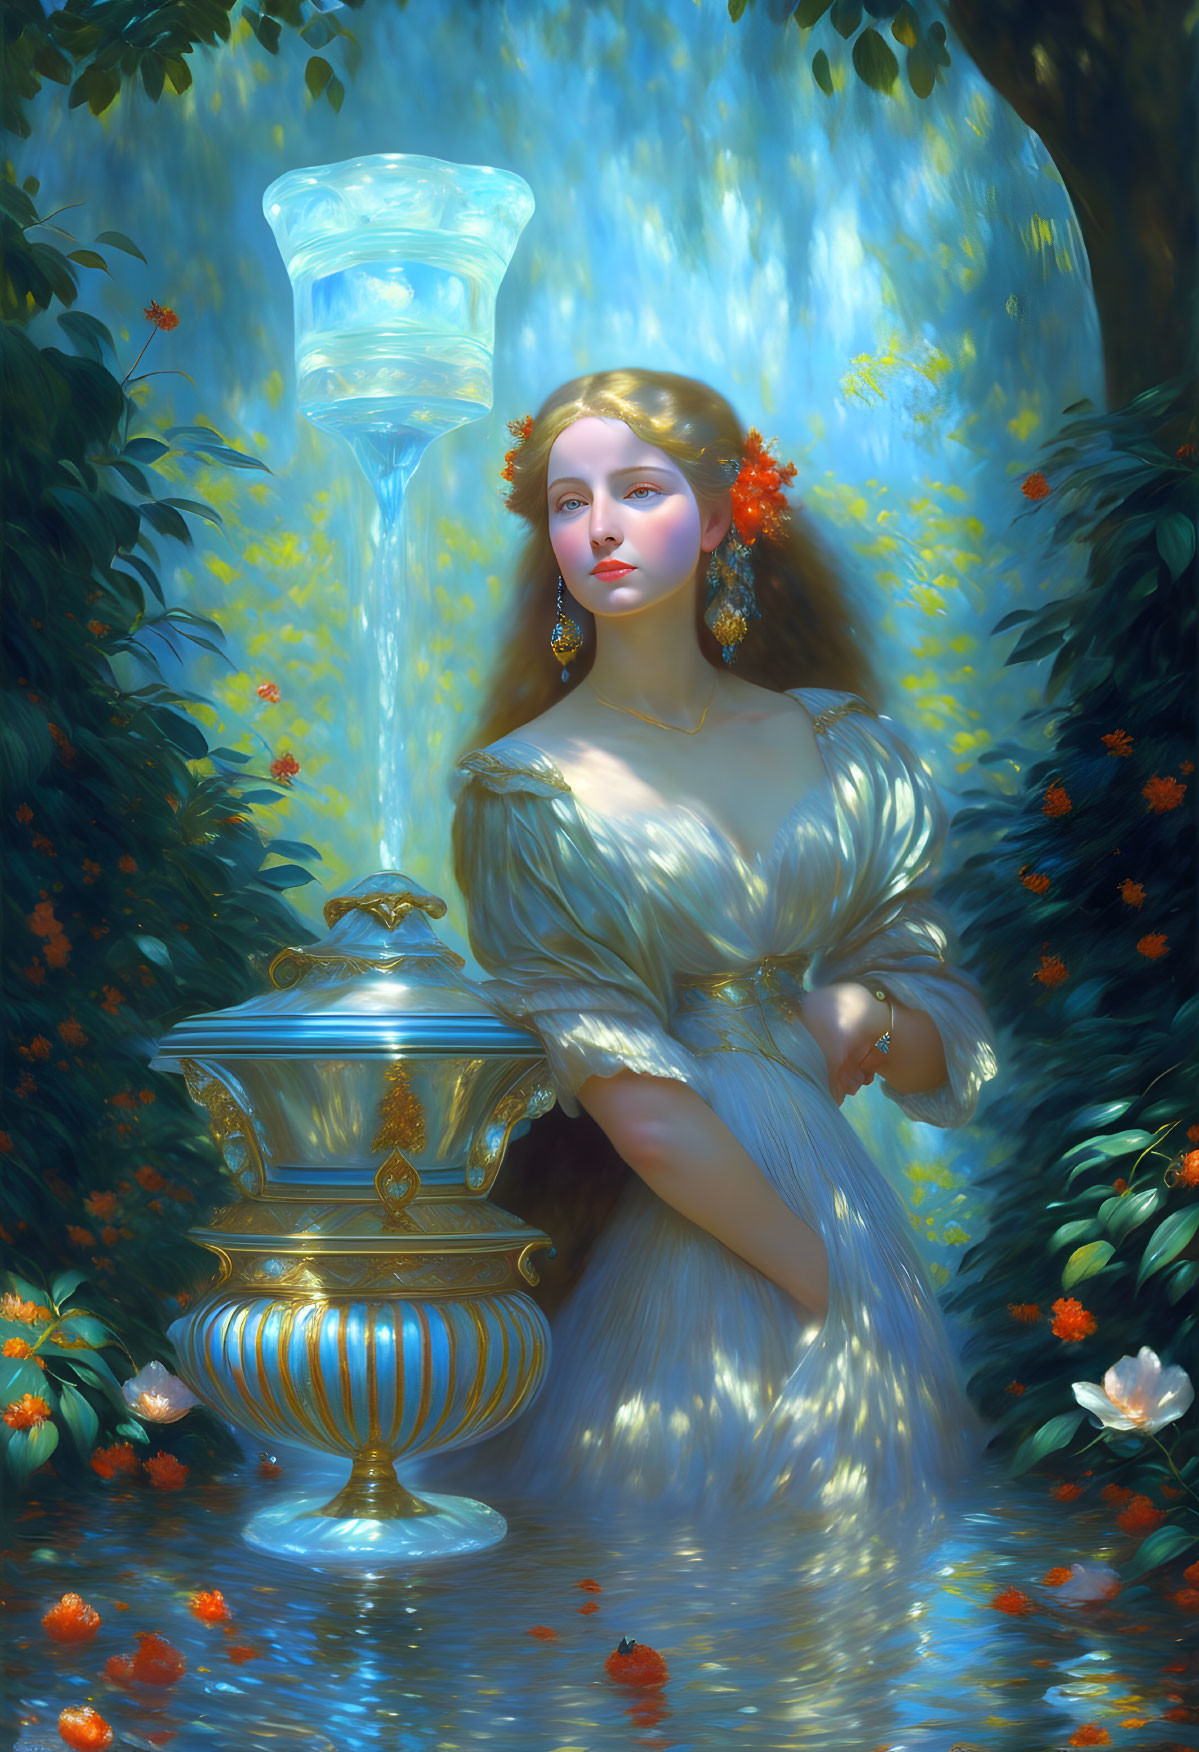 Woman in flowing gown next to golden vessel in blue forest glade